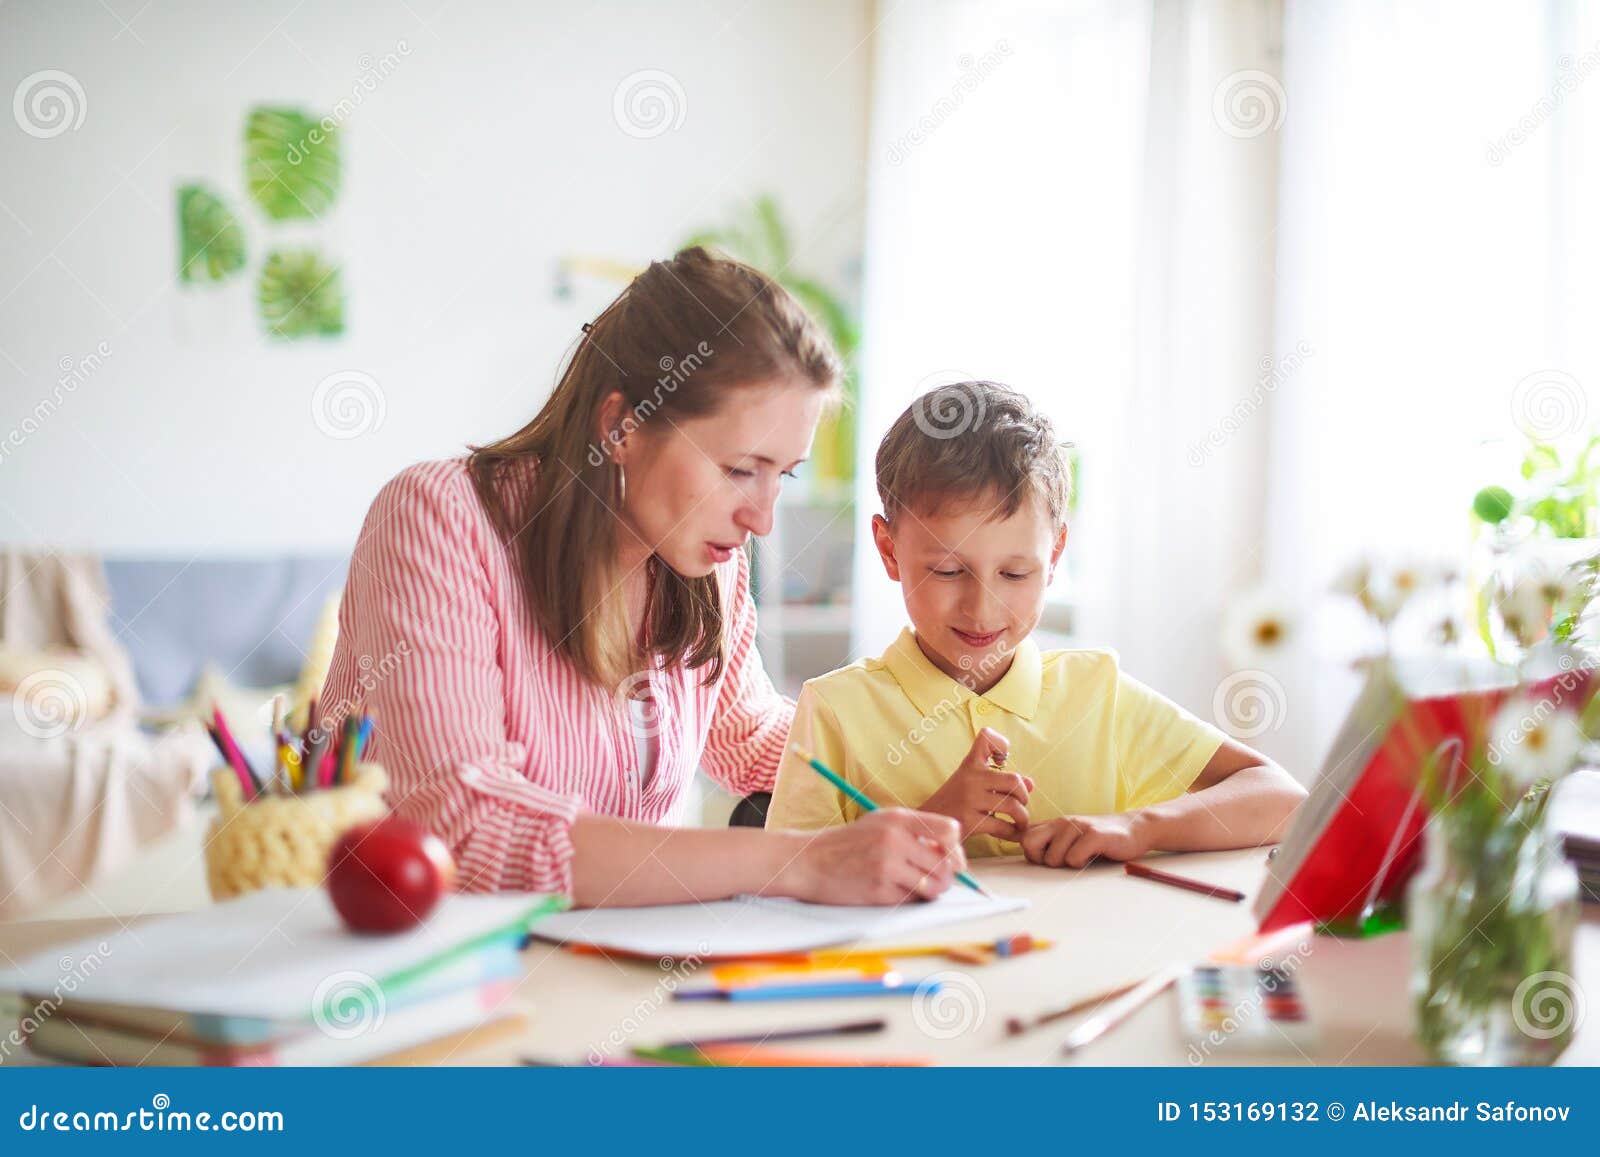 mother helps son to do lessons. home schooling, home lessons. the tutor is engaged with the child, teaches to write and count